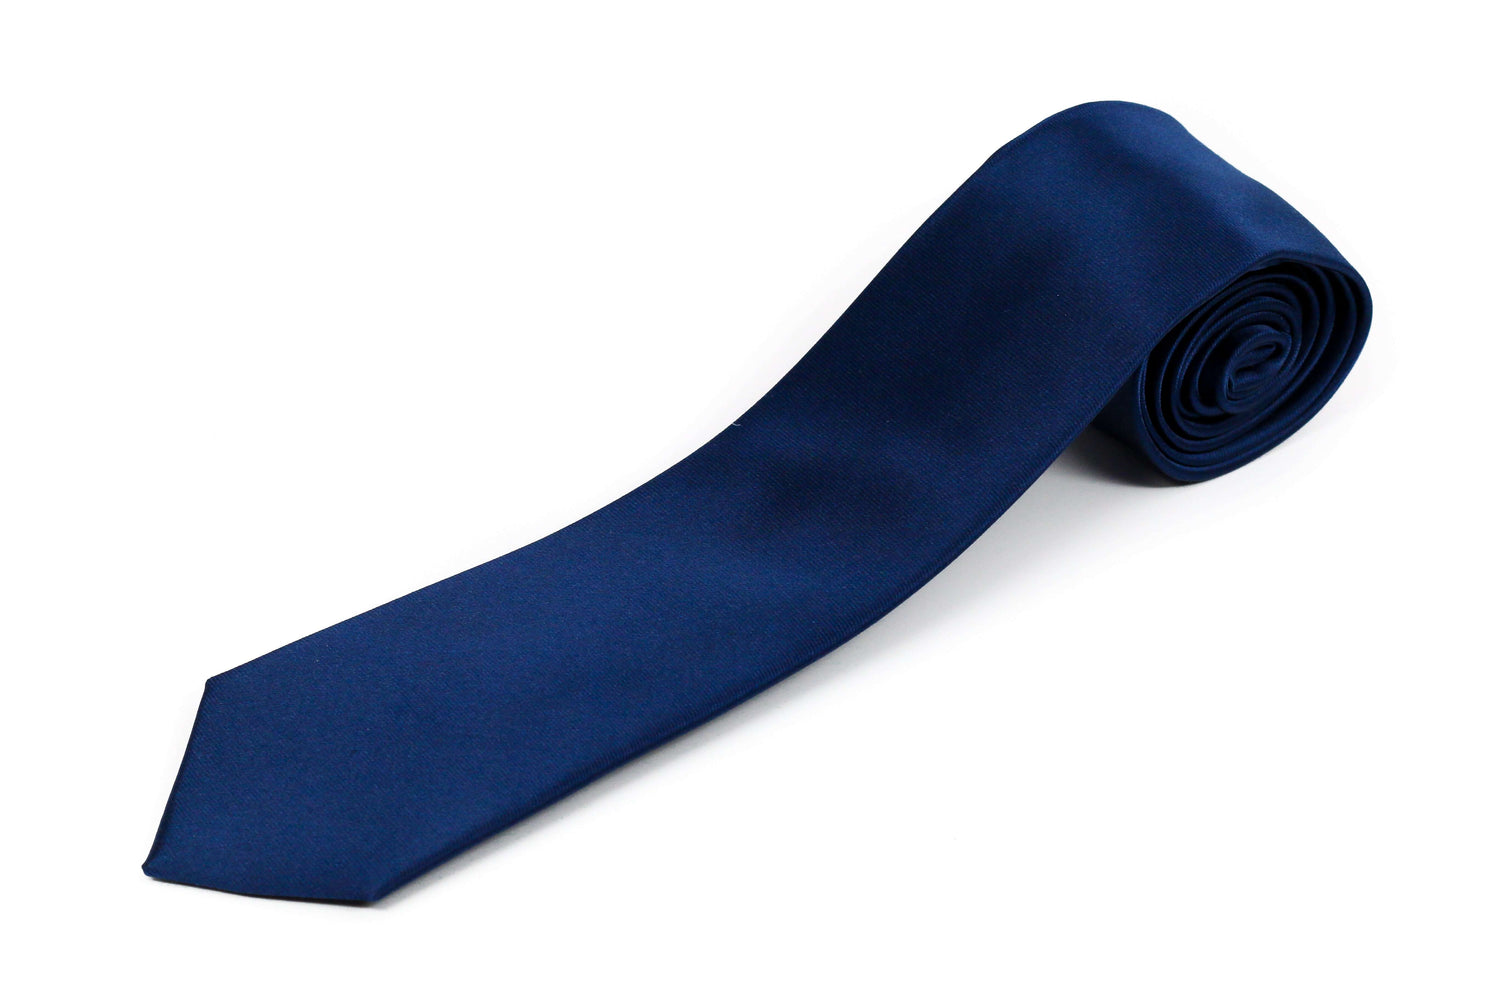 Extra long tie for big and tall men